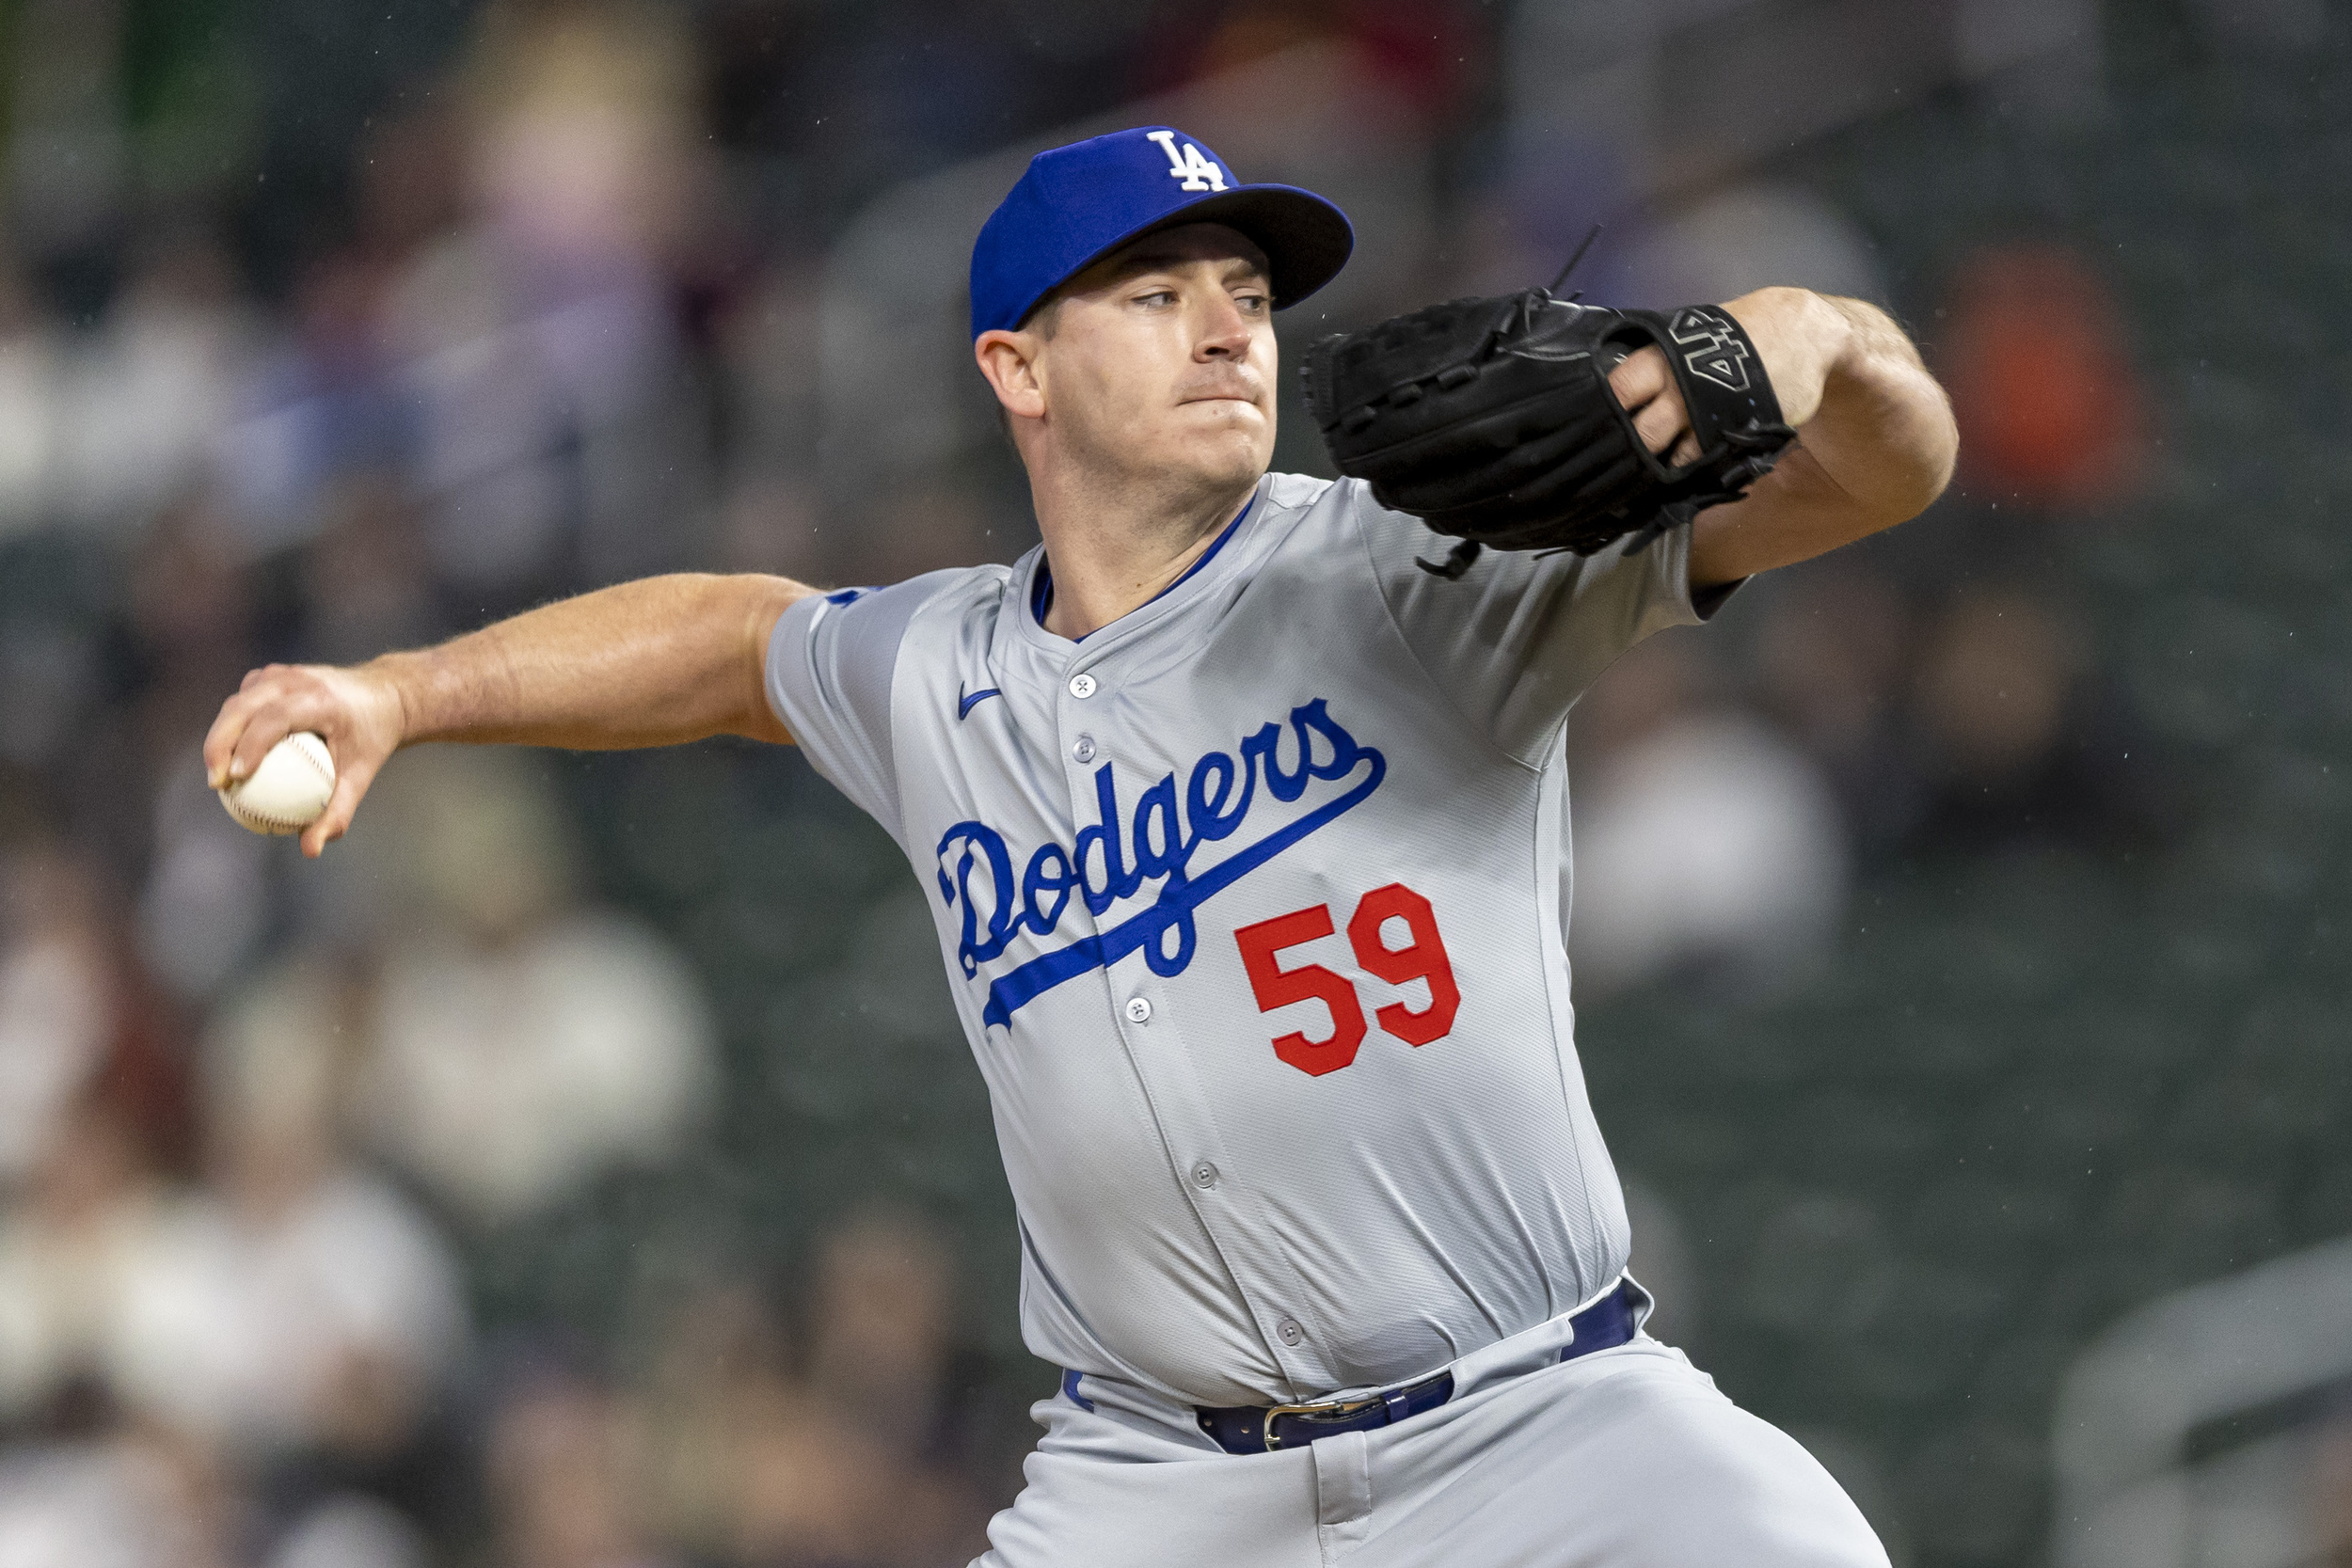 dodgers place right-hander on 15-day injured list